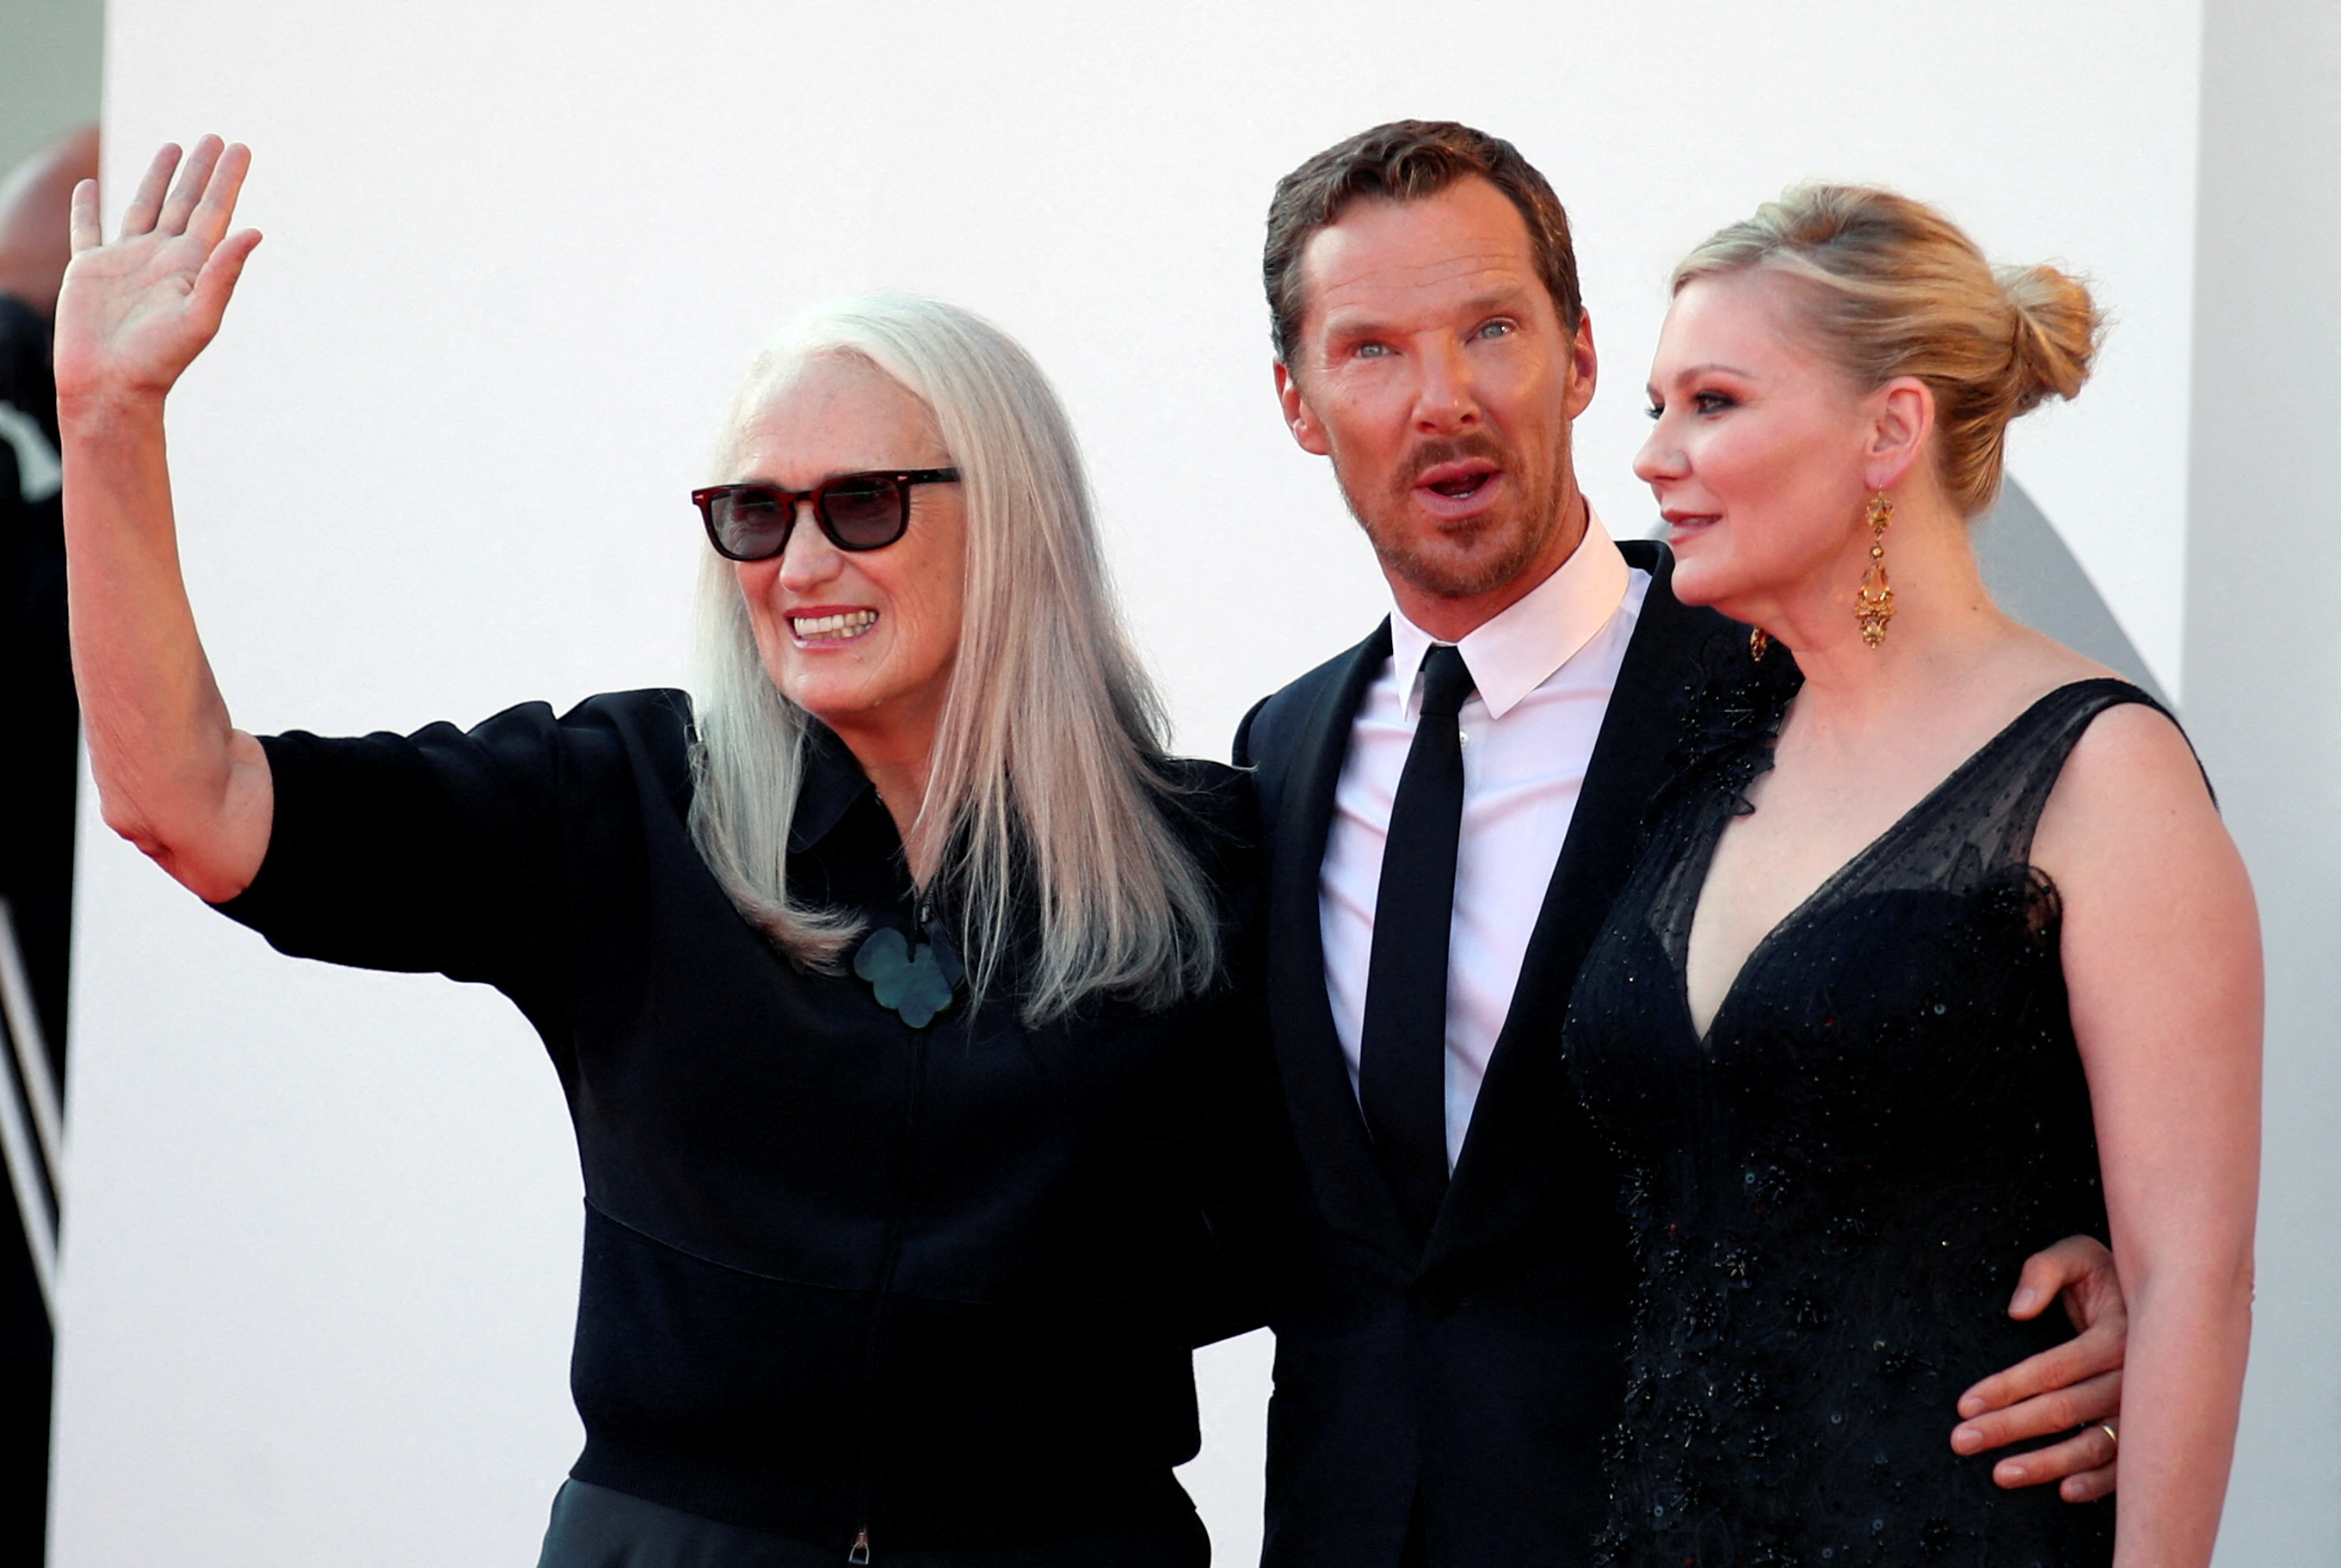 The 78th Venice Film Festival - Screening of the film 'The Power of the Dog' in competition - Director Jane Campion, actor Benedict Cumberbatch and actor Kirsten Dunst pose